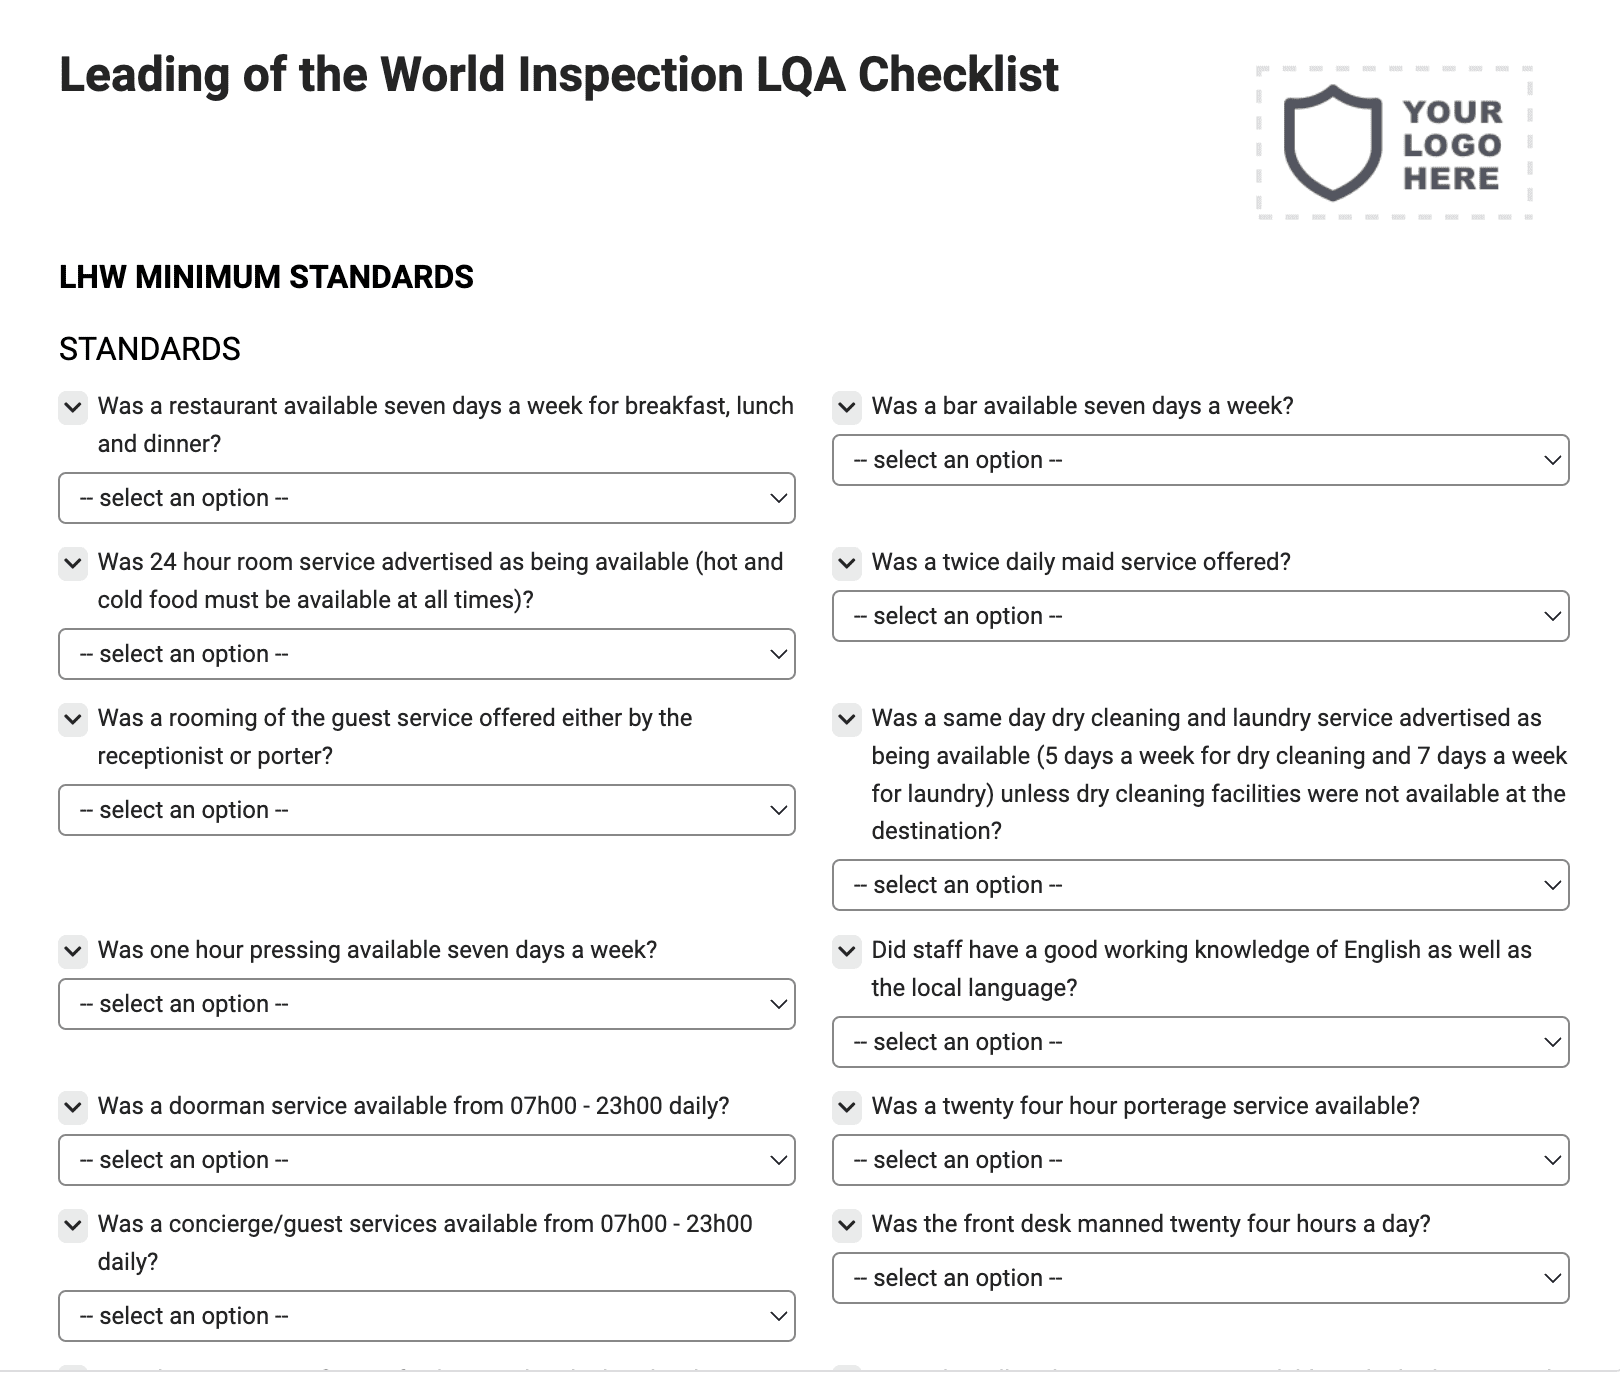 Leading of the World Inspection LQA Checklist